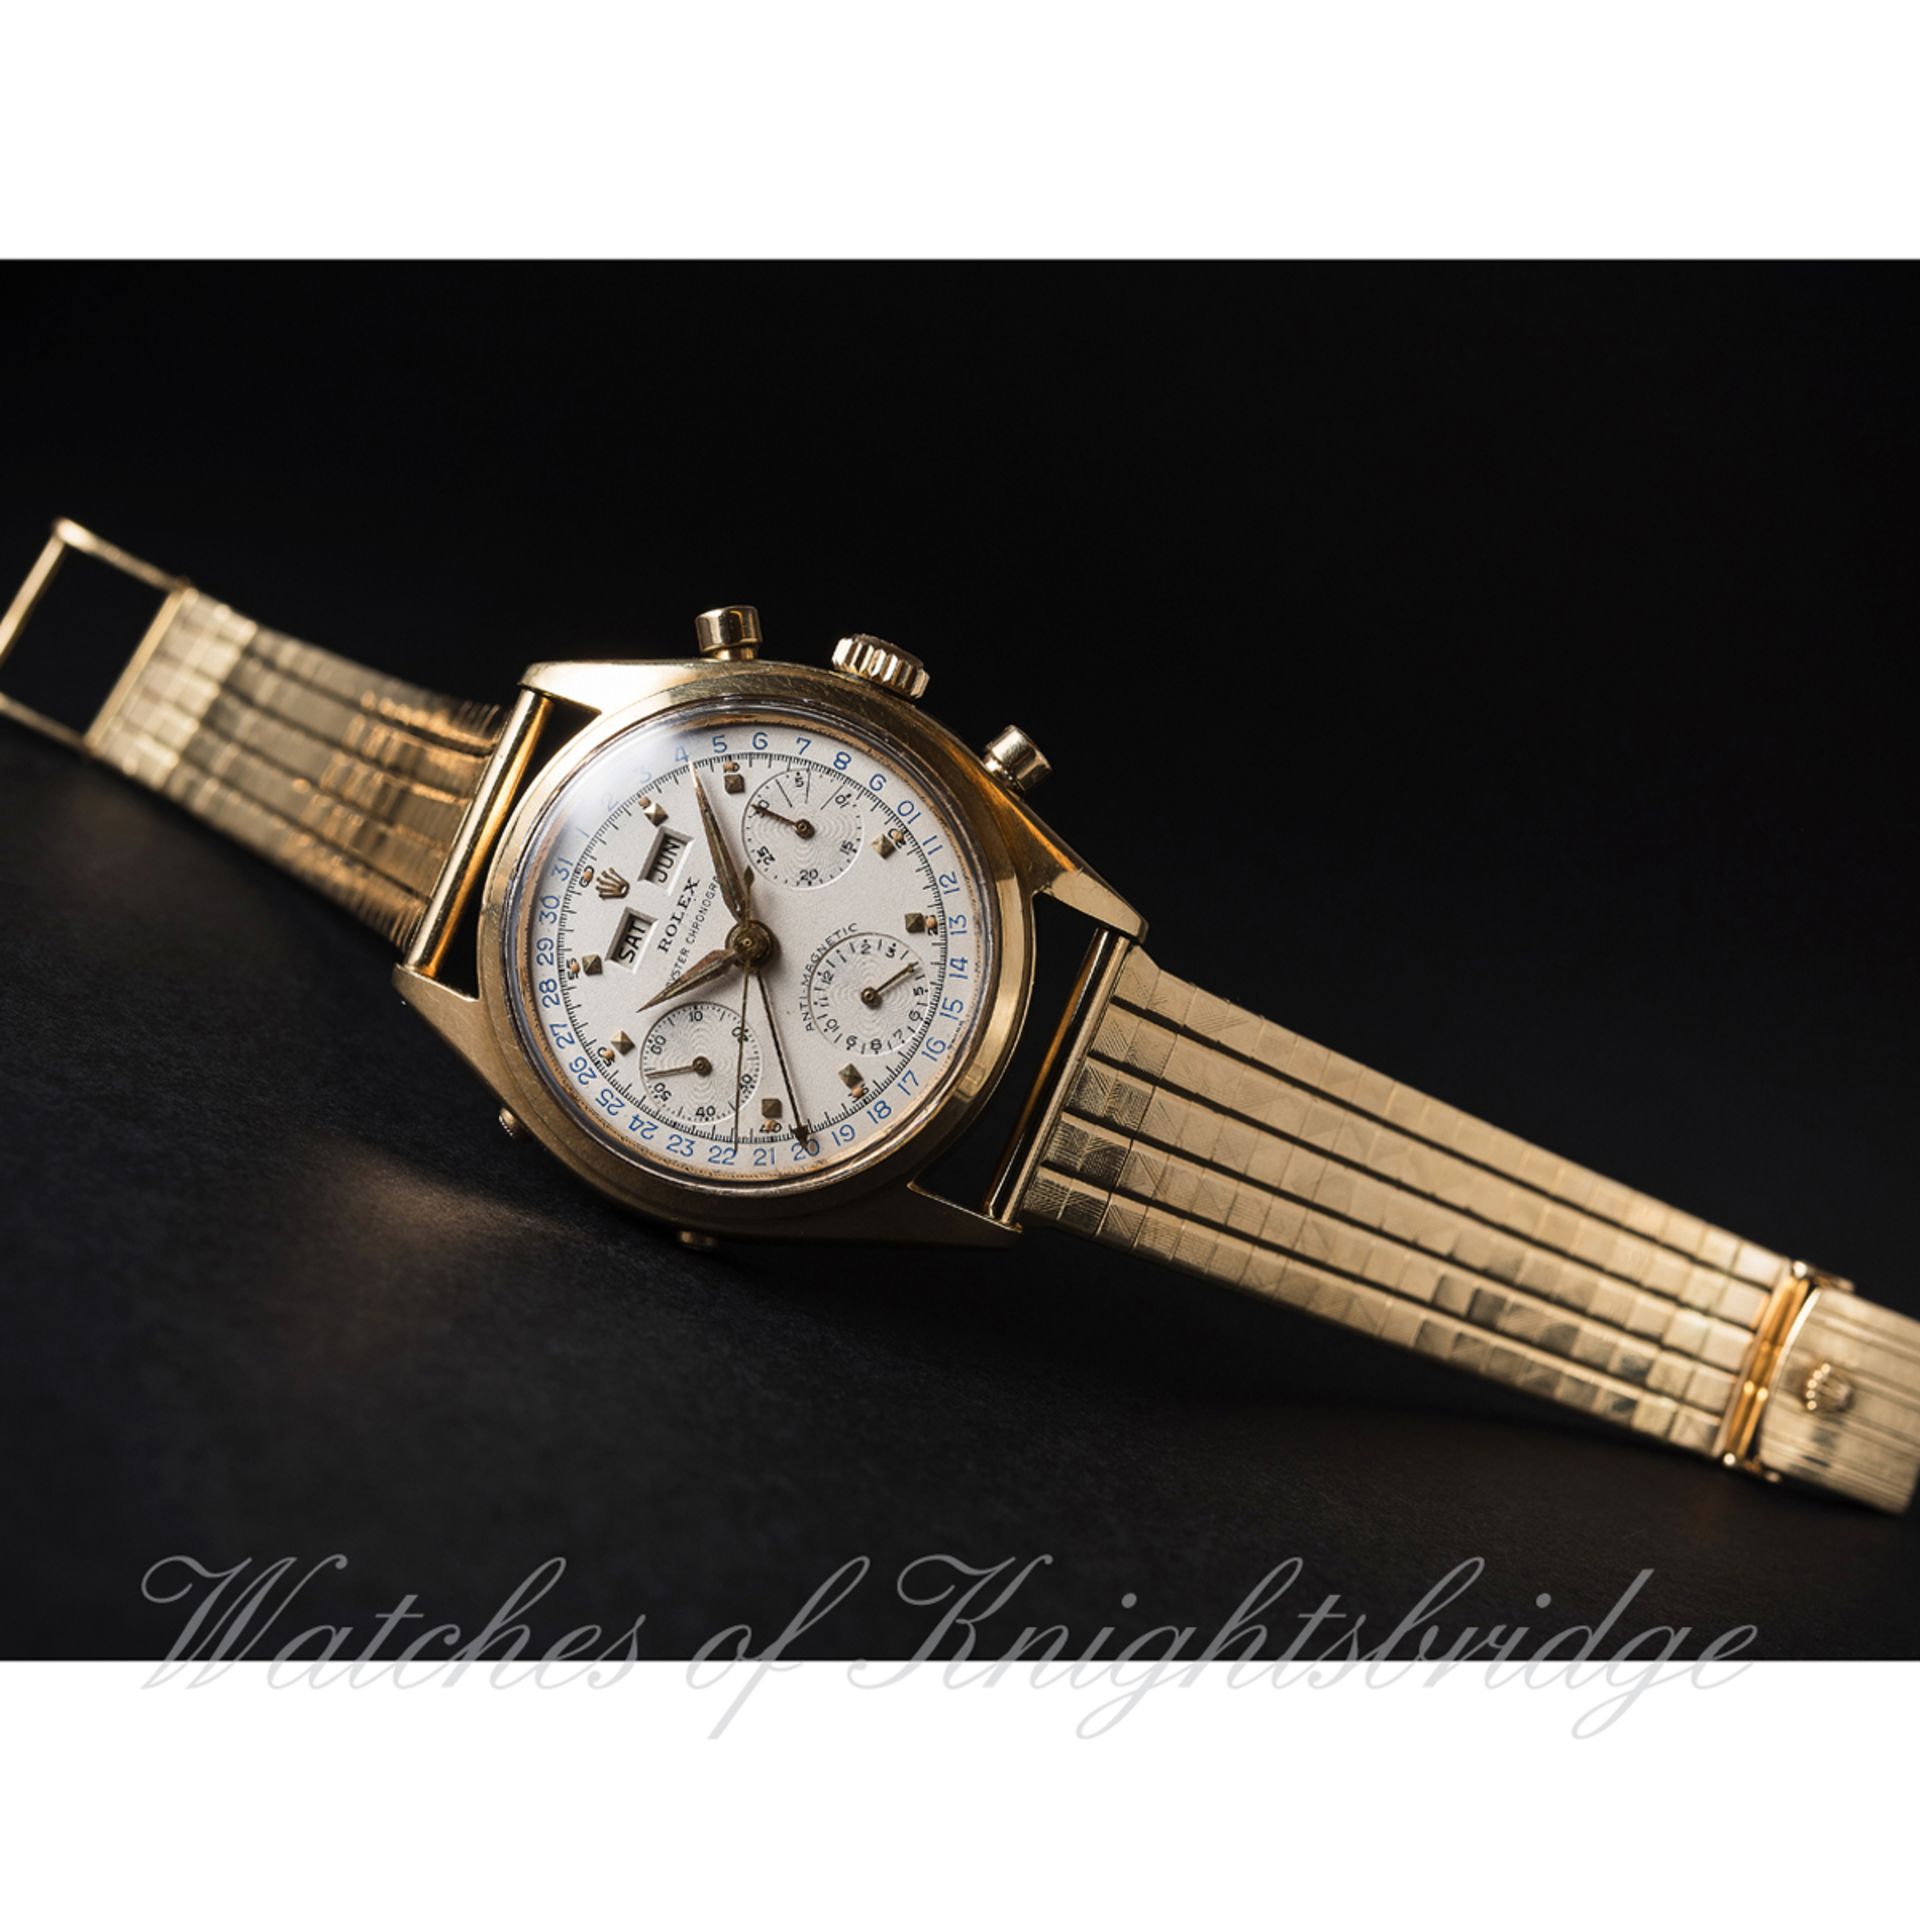 A FINE & RARE GENTLEMAN'S 18K SOLID GOLD ROLEX "JEAN-CLAUDE KILLY" OYSTER TRIPLE CALENDAR ANTI- - Image 2 of 13